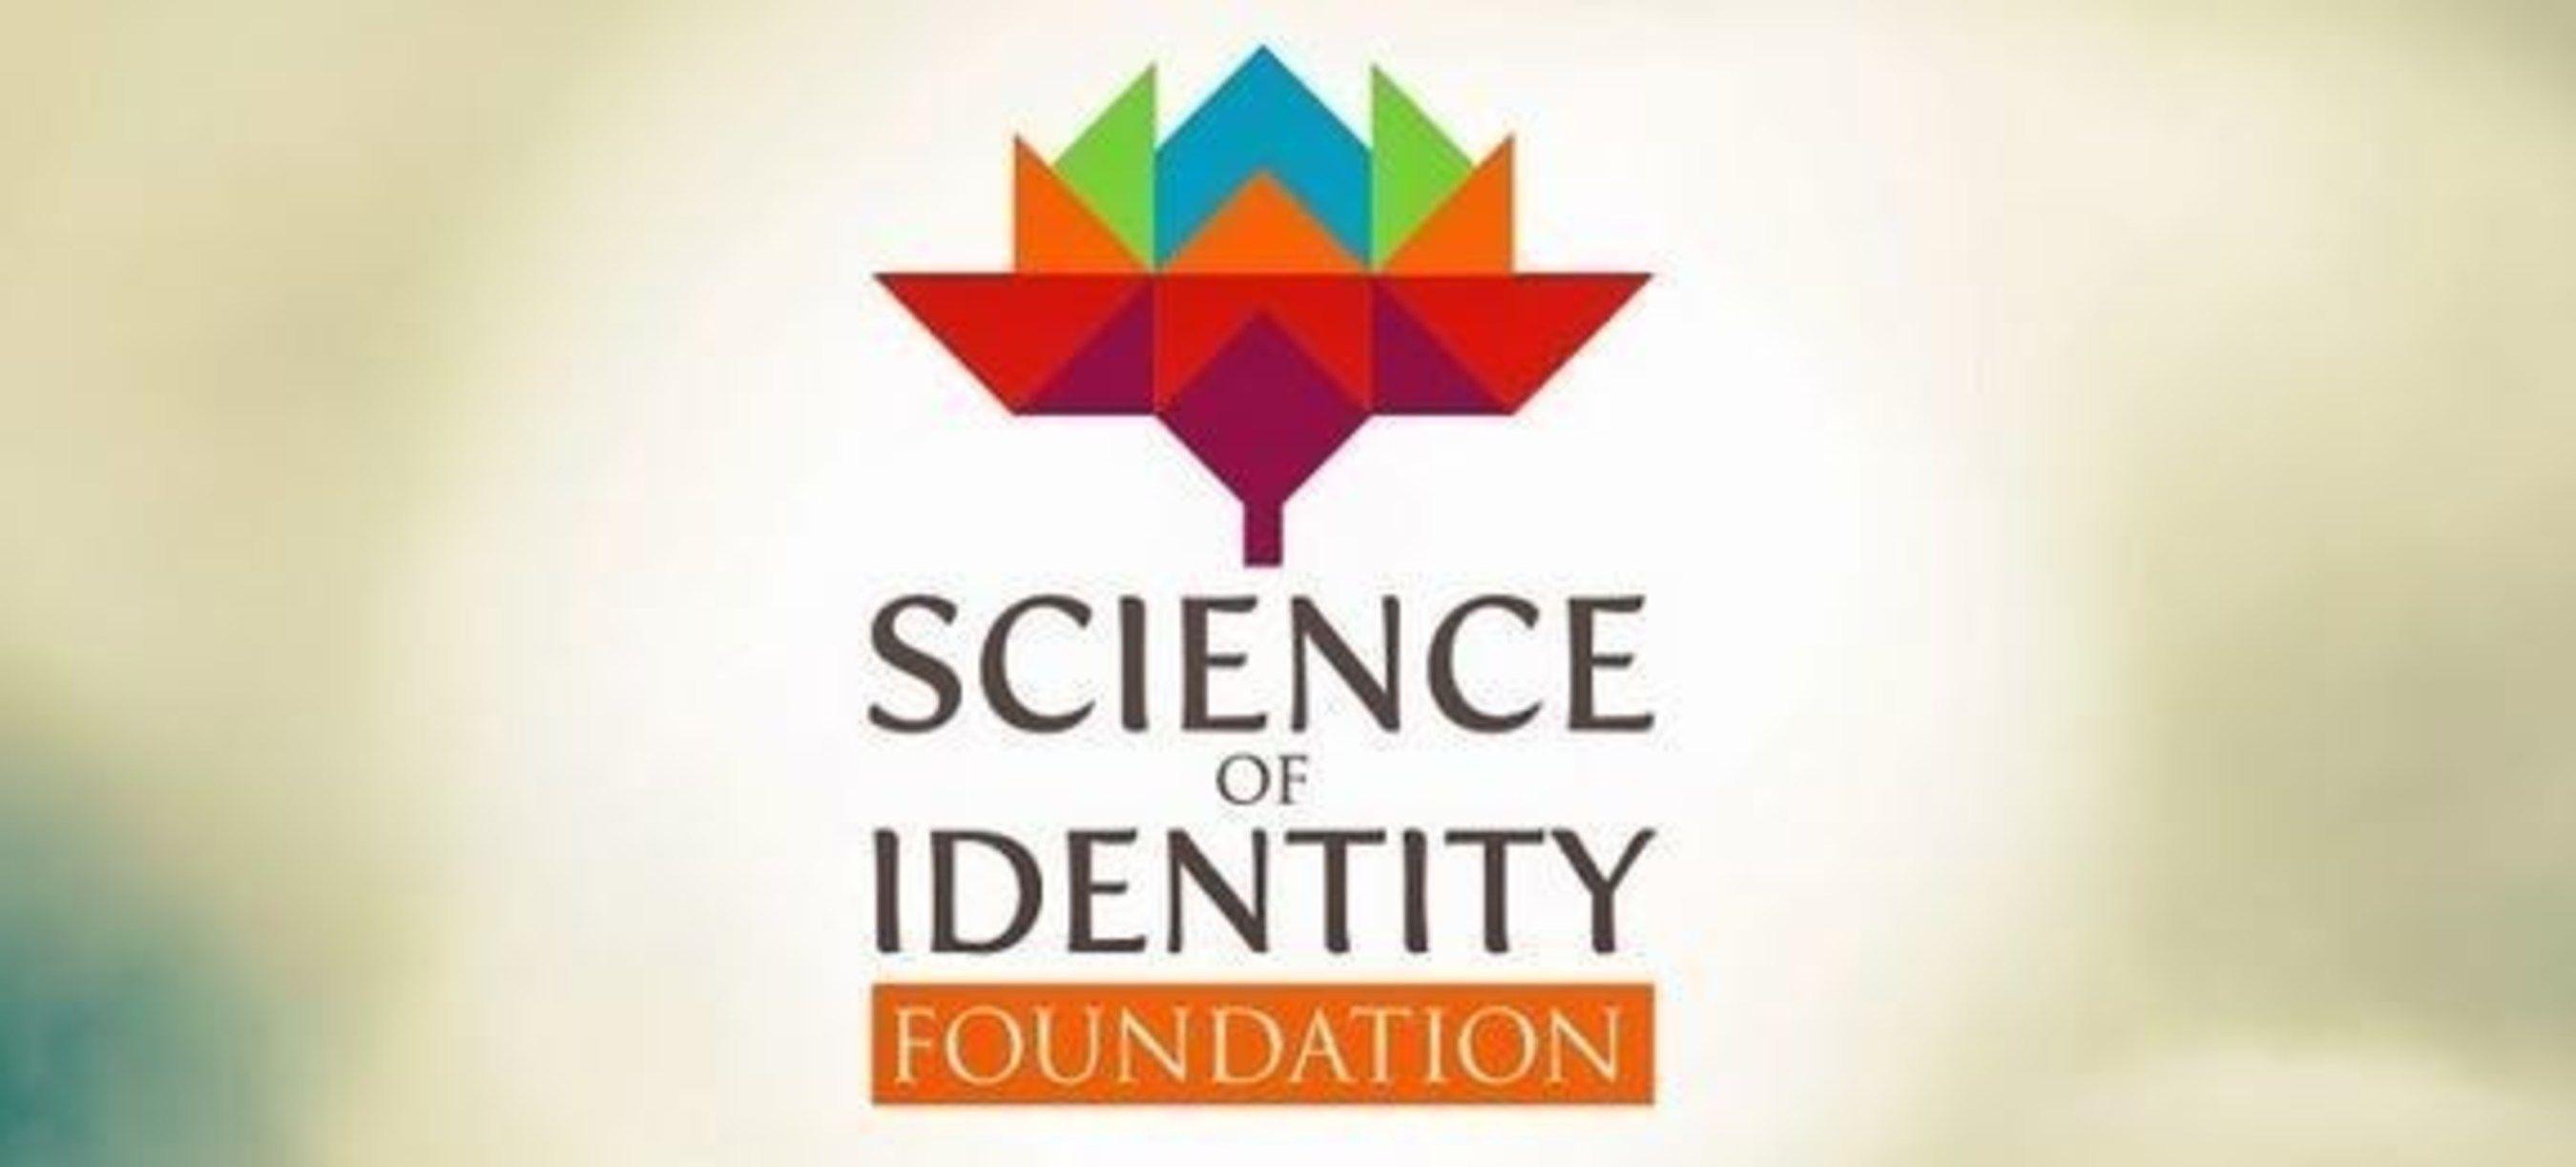 Karma Word Logo - Science of Identity Foundation Releases New Video Series ...